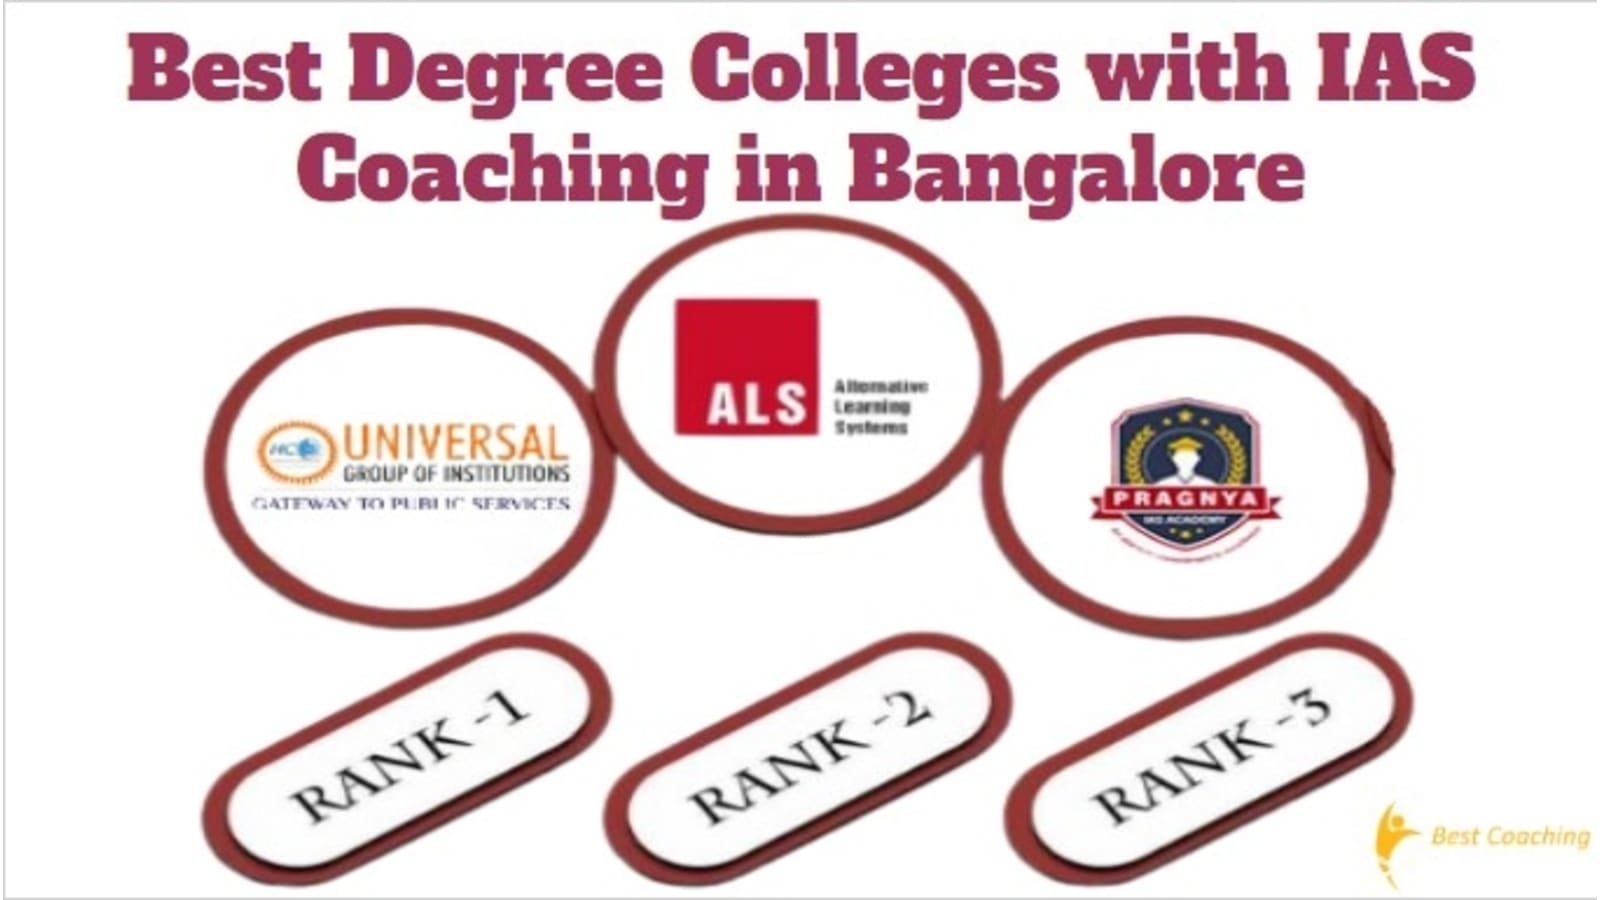 Best Degree Colleges with IAS Coaching in Bangalore